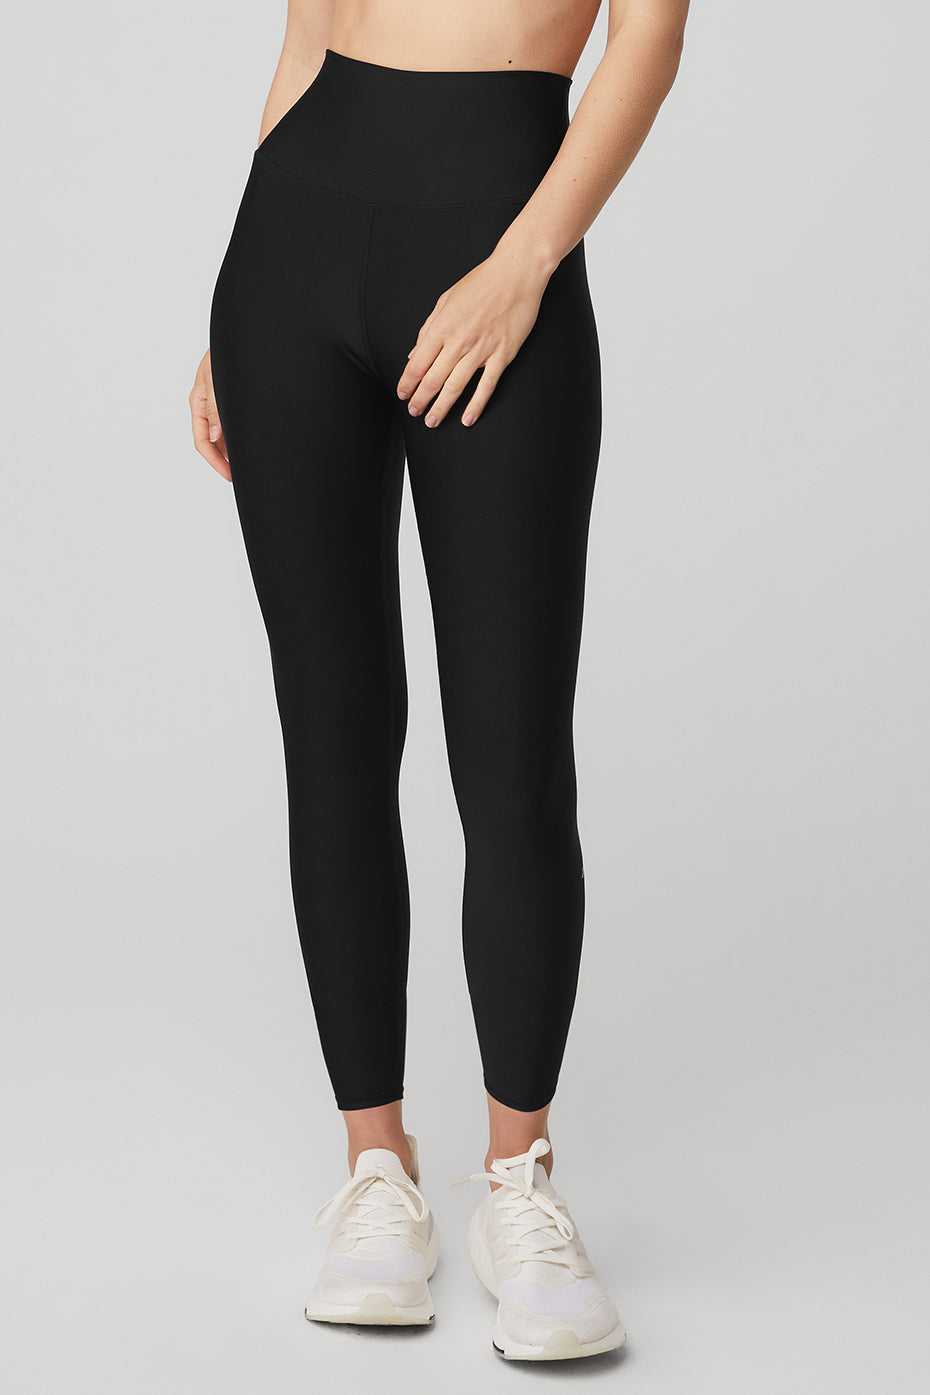 Alo Yoga® | 7/8 High-Waist Airlift Legging in Black, Size: Small